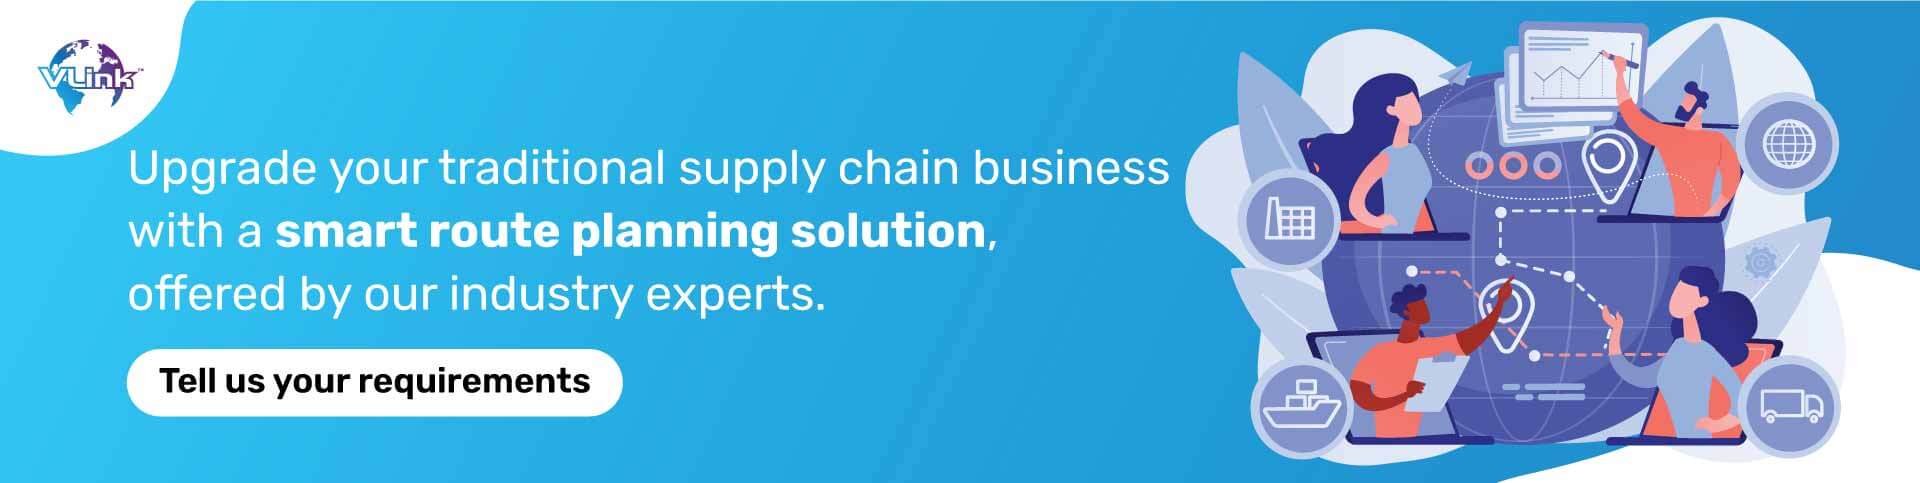 Supply Chain Businesses -CTA